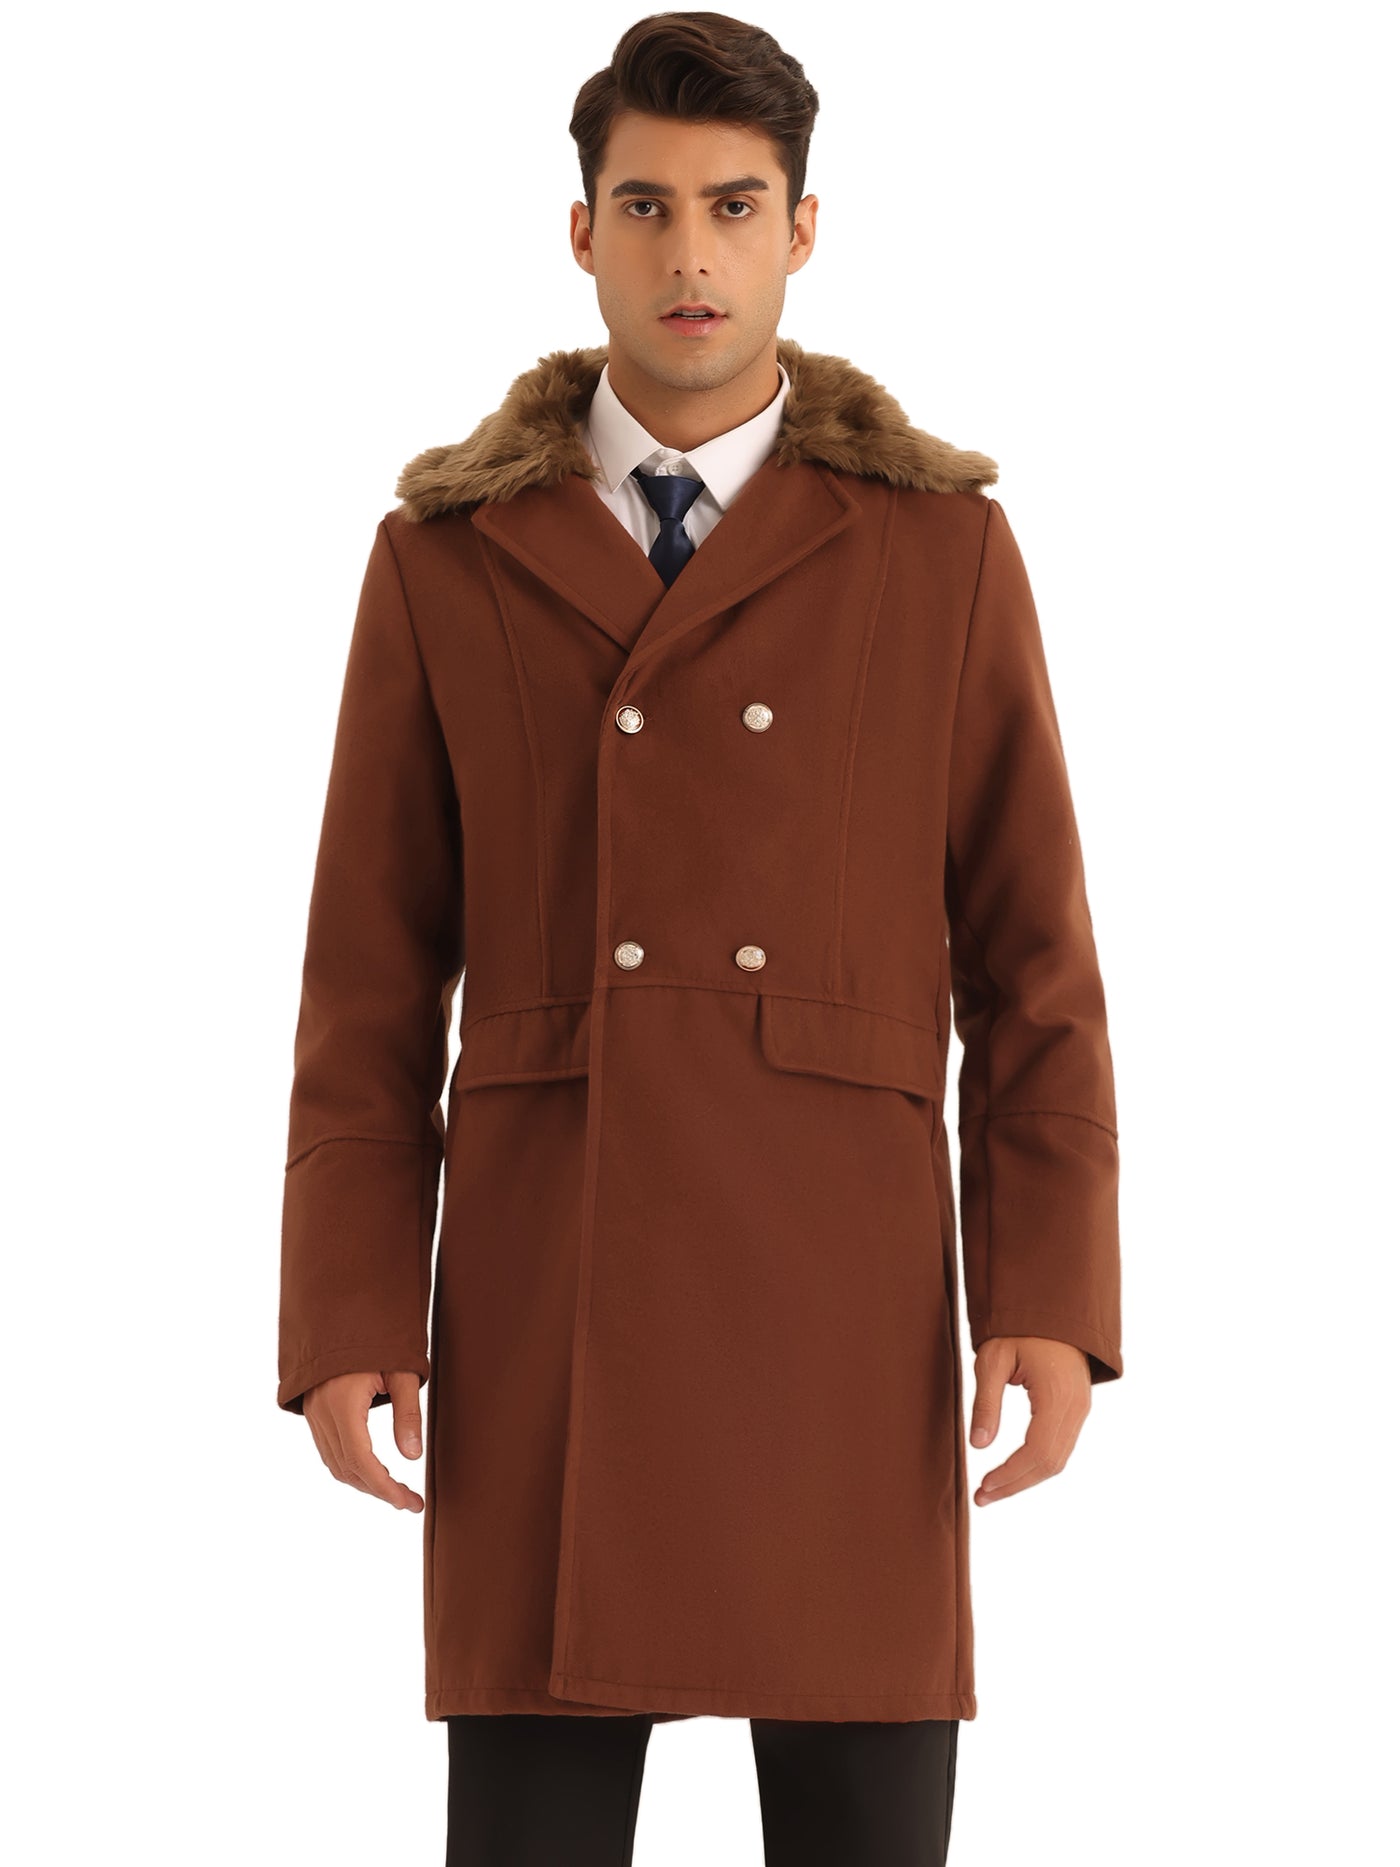 Bublédon Trench Coat for Men's Double Breasted Removable Faux Fur Collar Winter Overcoat